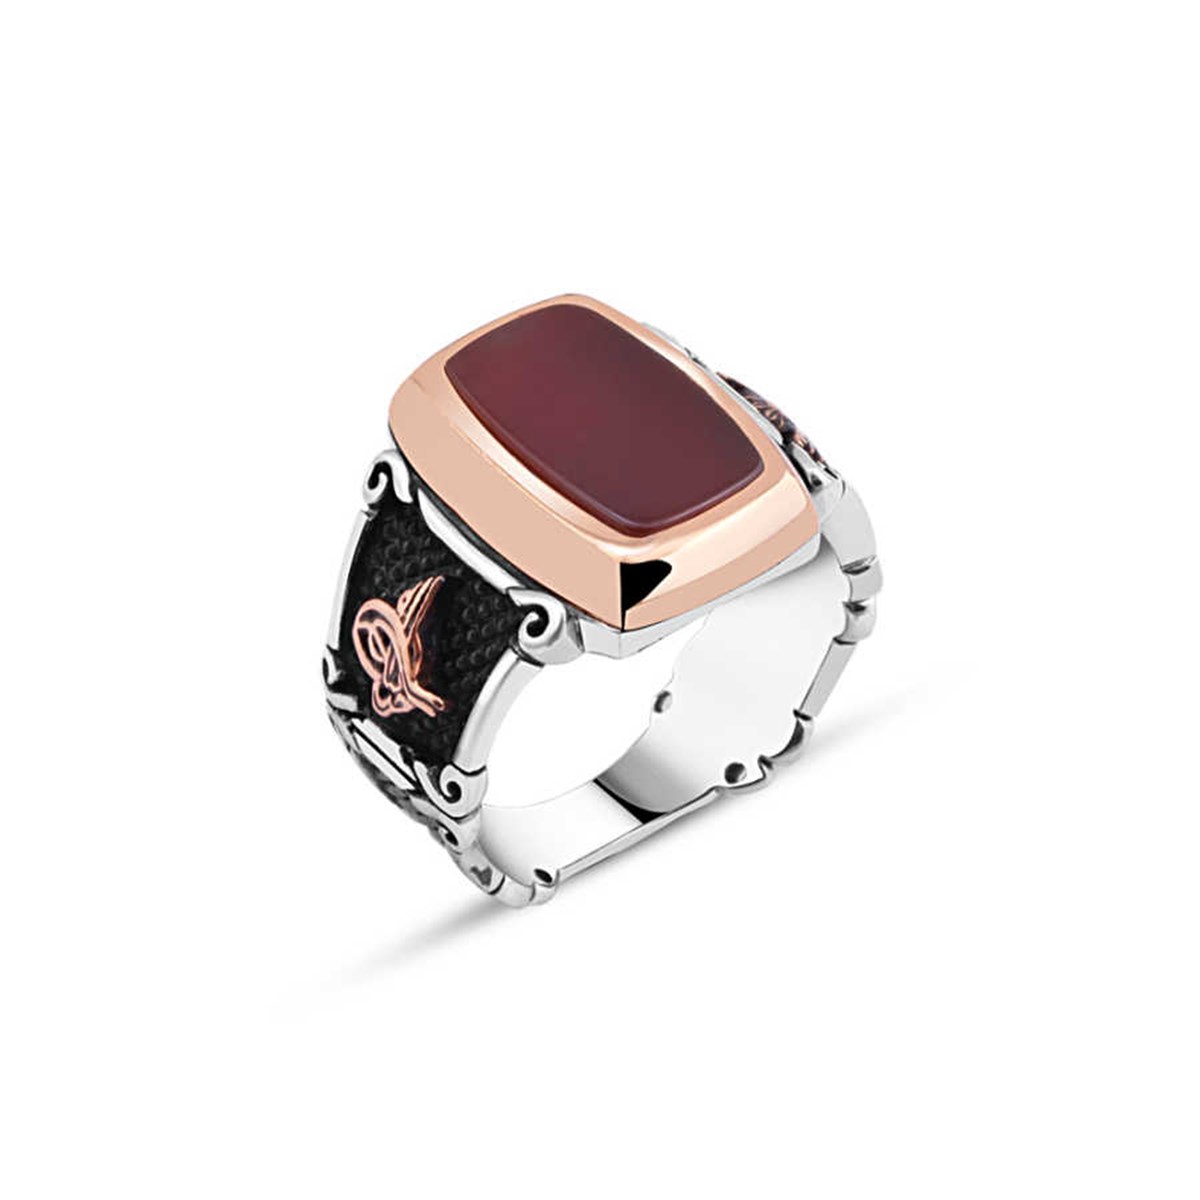 Agate Stone Silver Men's Ring